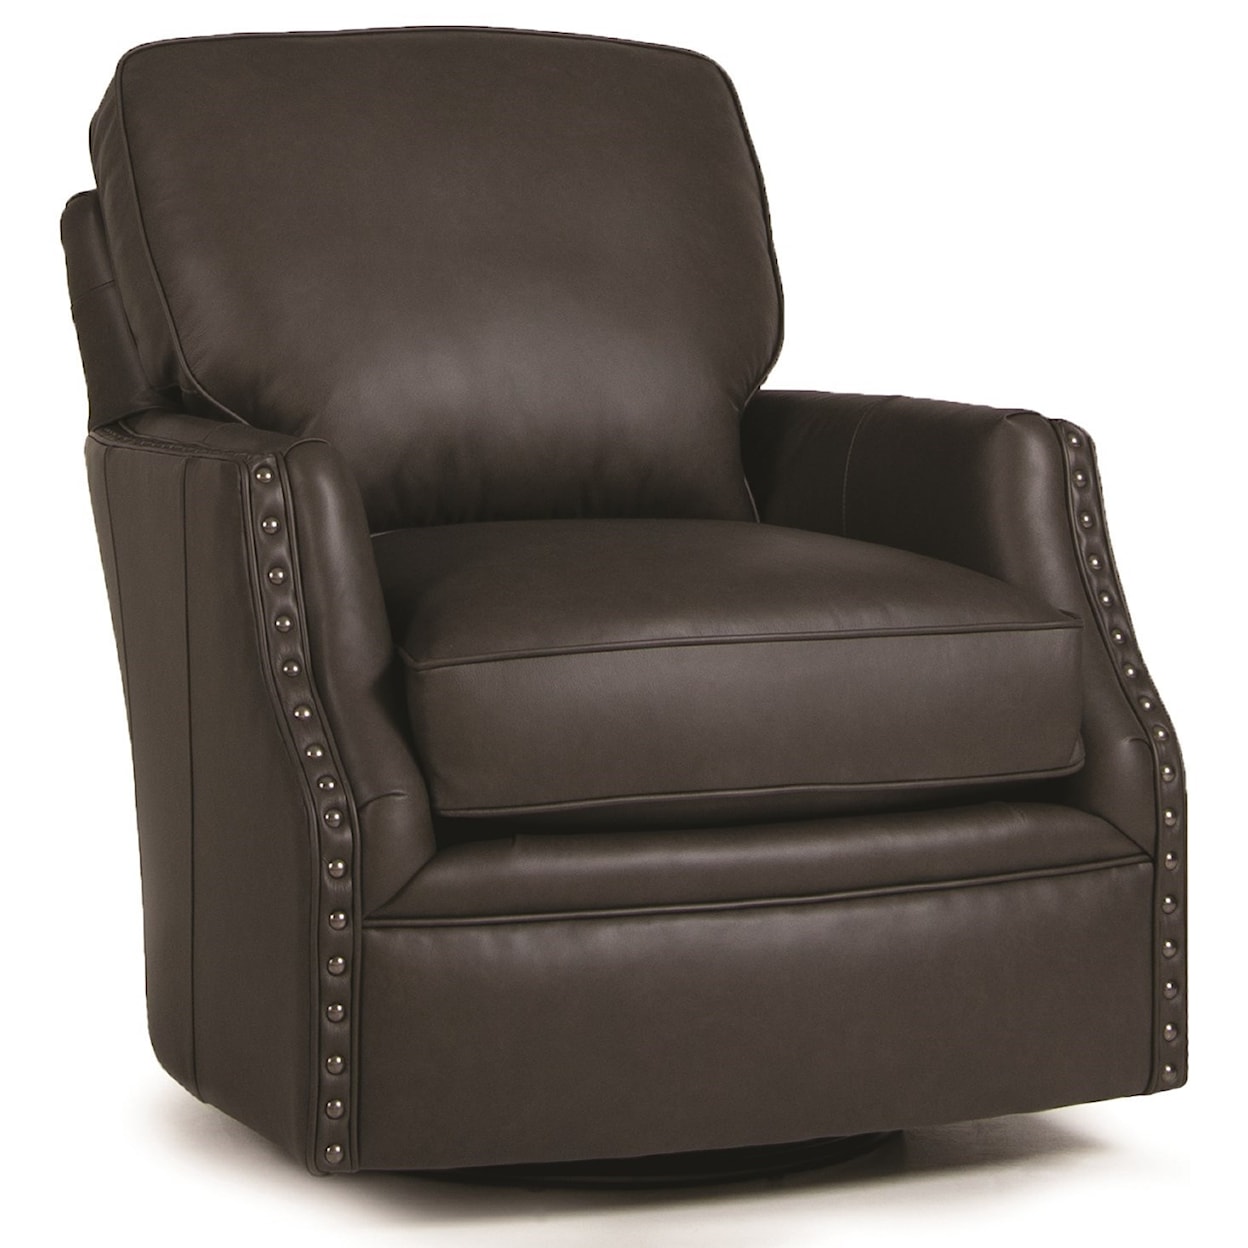 Smith Brothers 526 Swivel Chair